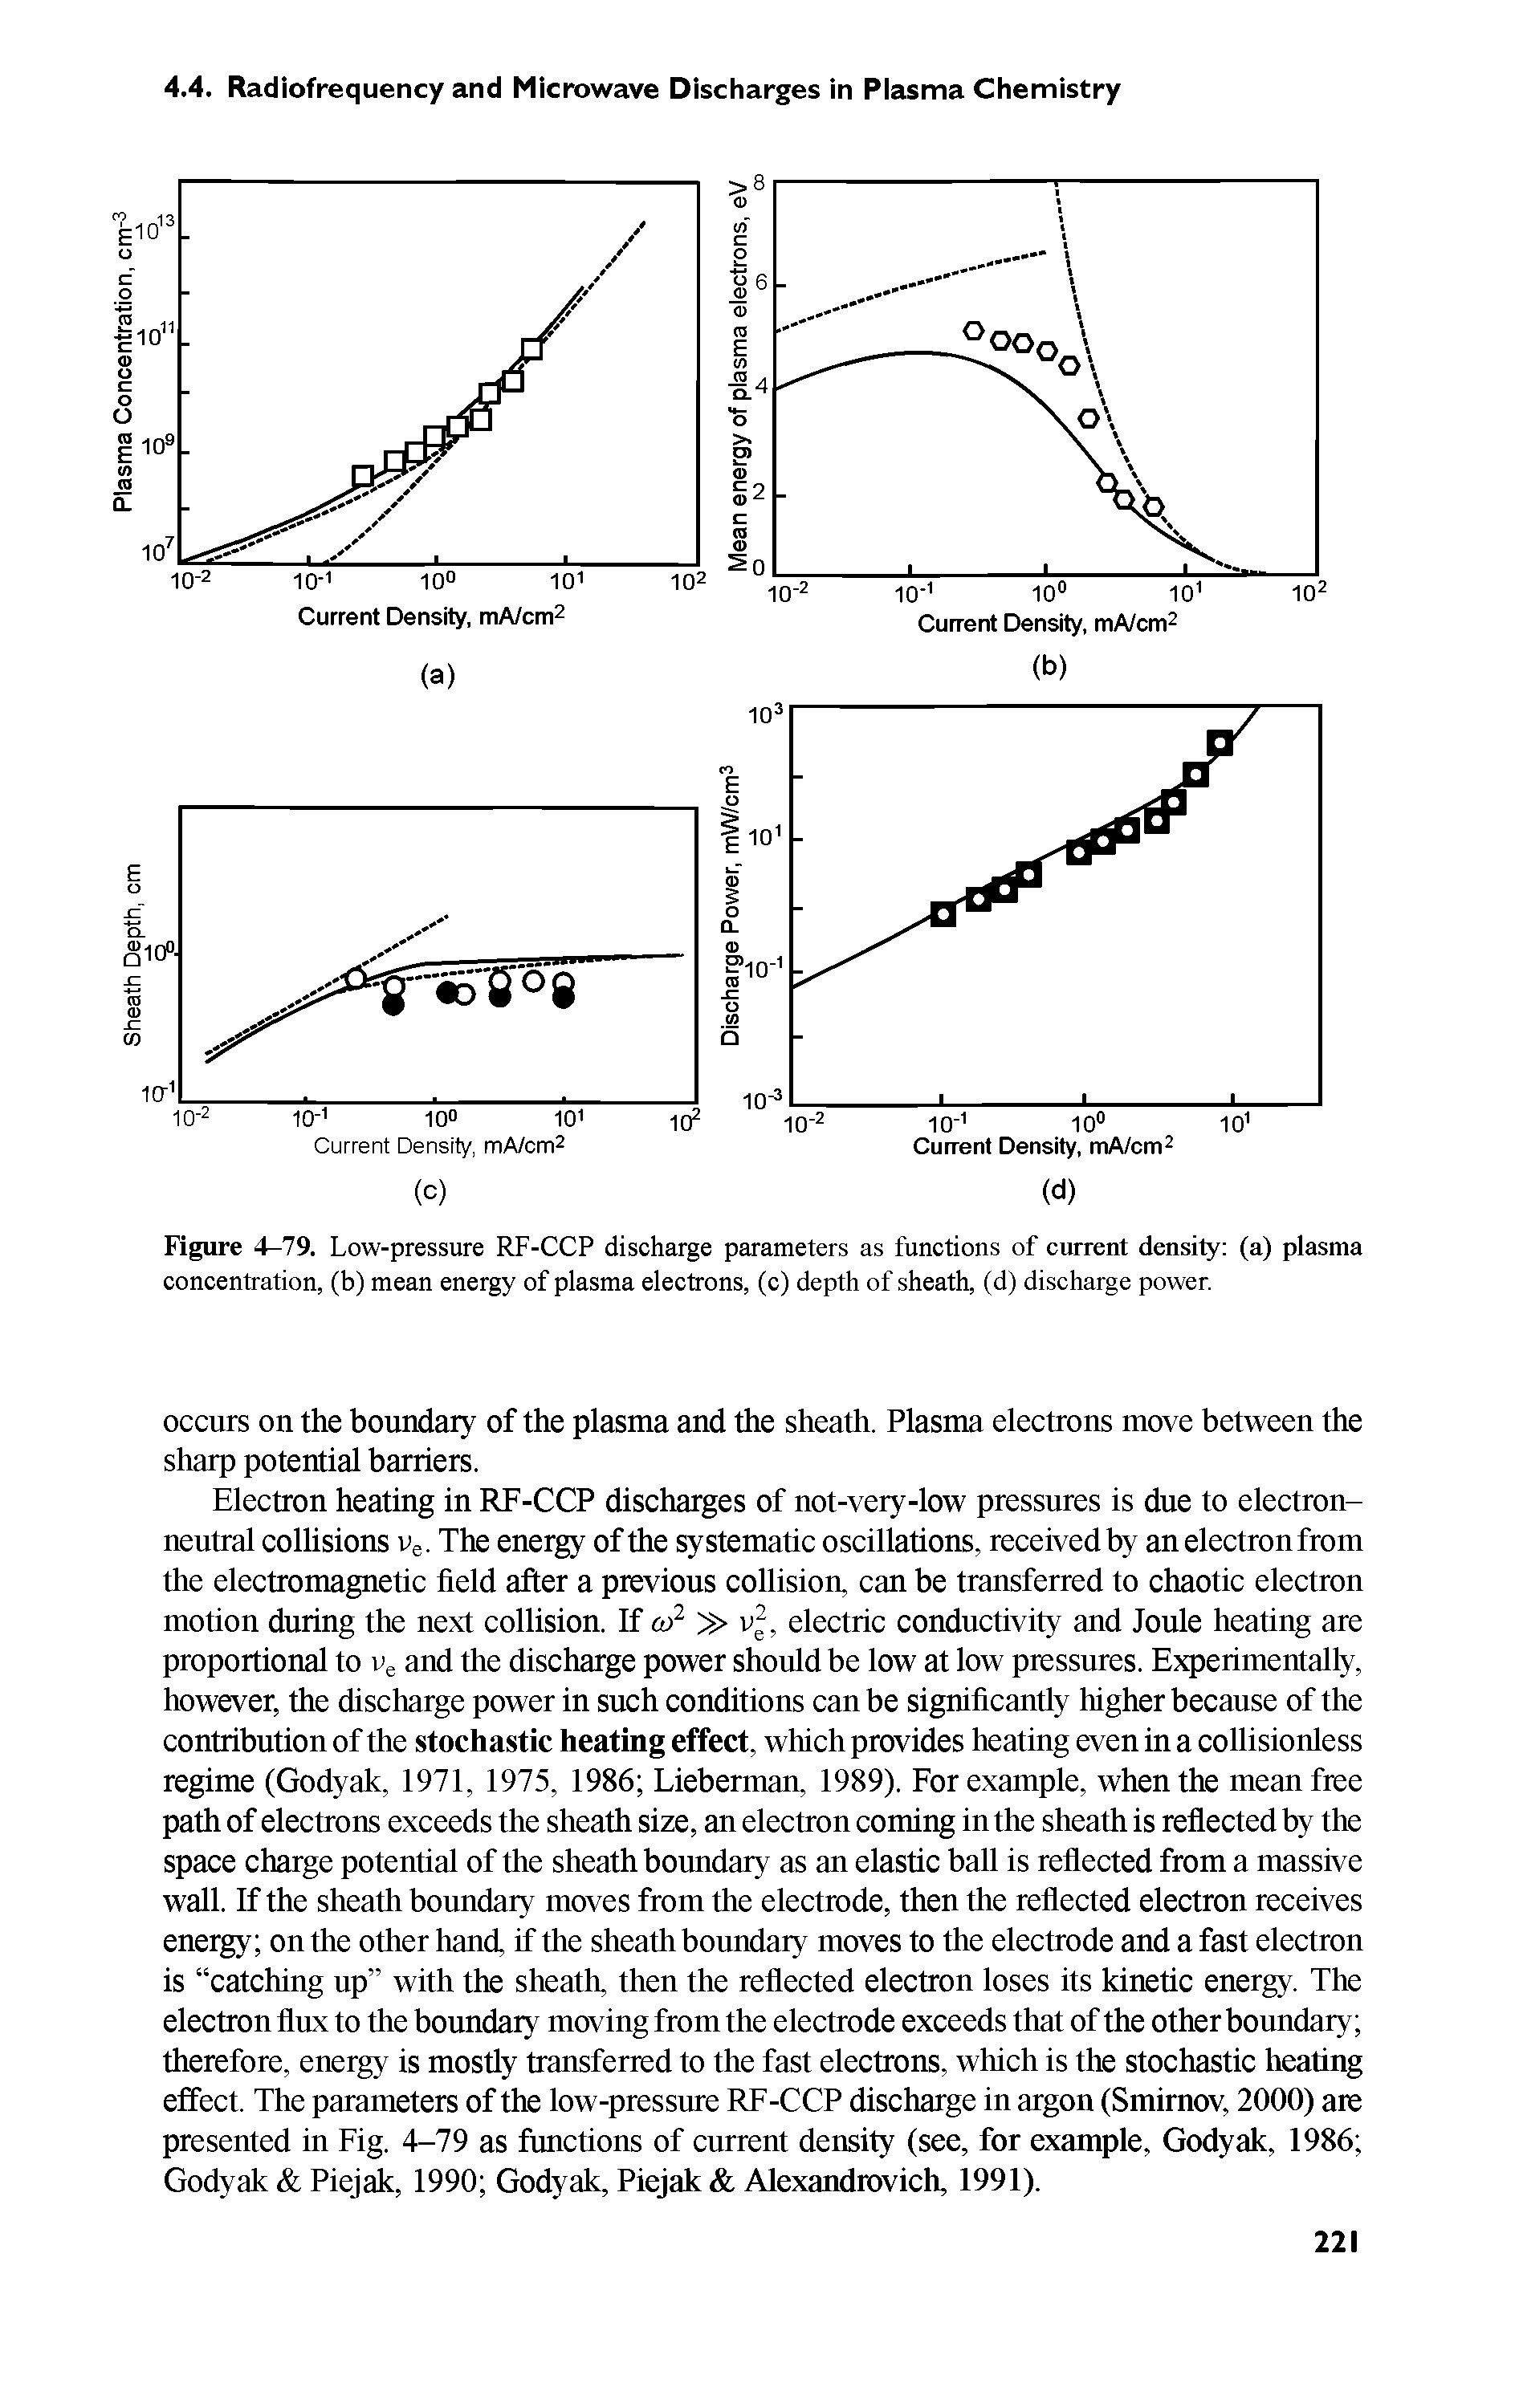 Figure 4-79. Low-pressure RF-CCP diseharge parameters as funetions of current density (a) plasma eoneentration, (b) mean energy of plasma eleetrons, (e) depth of sheath, (d) discharge power.